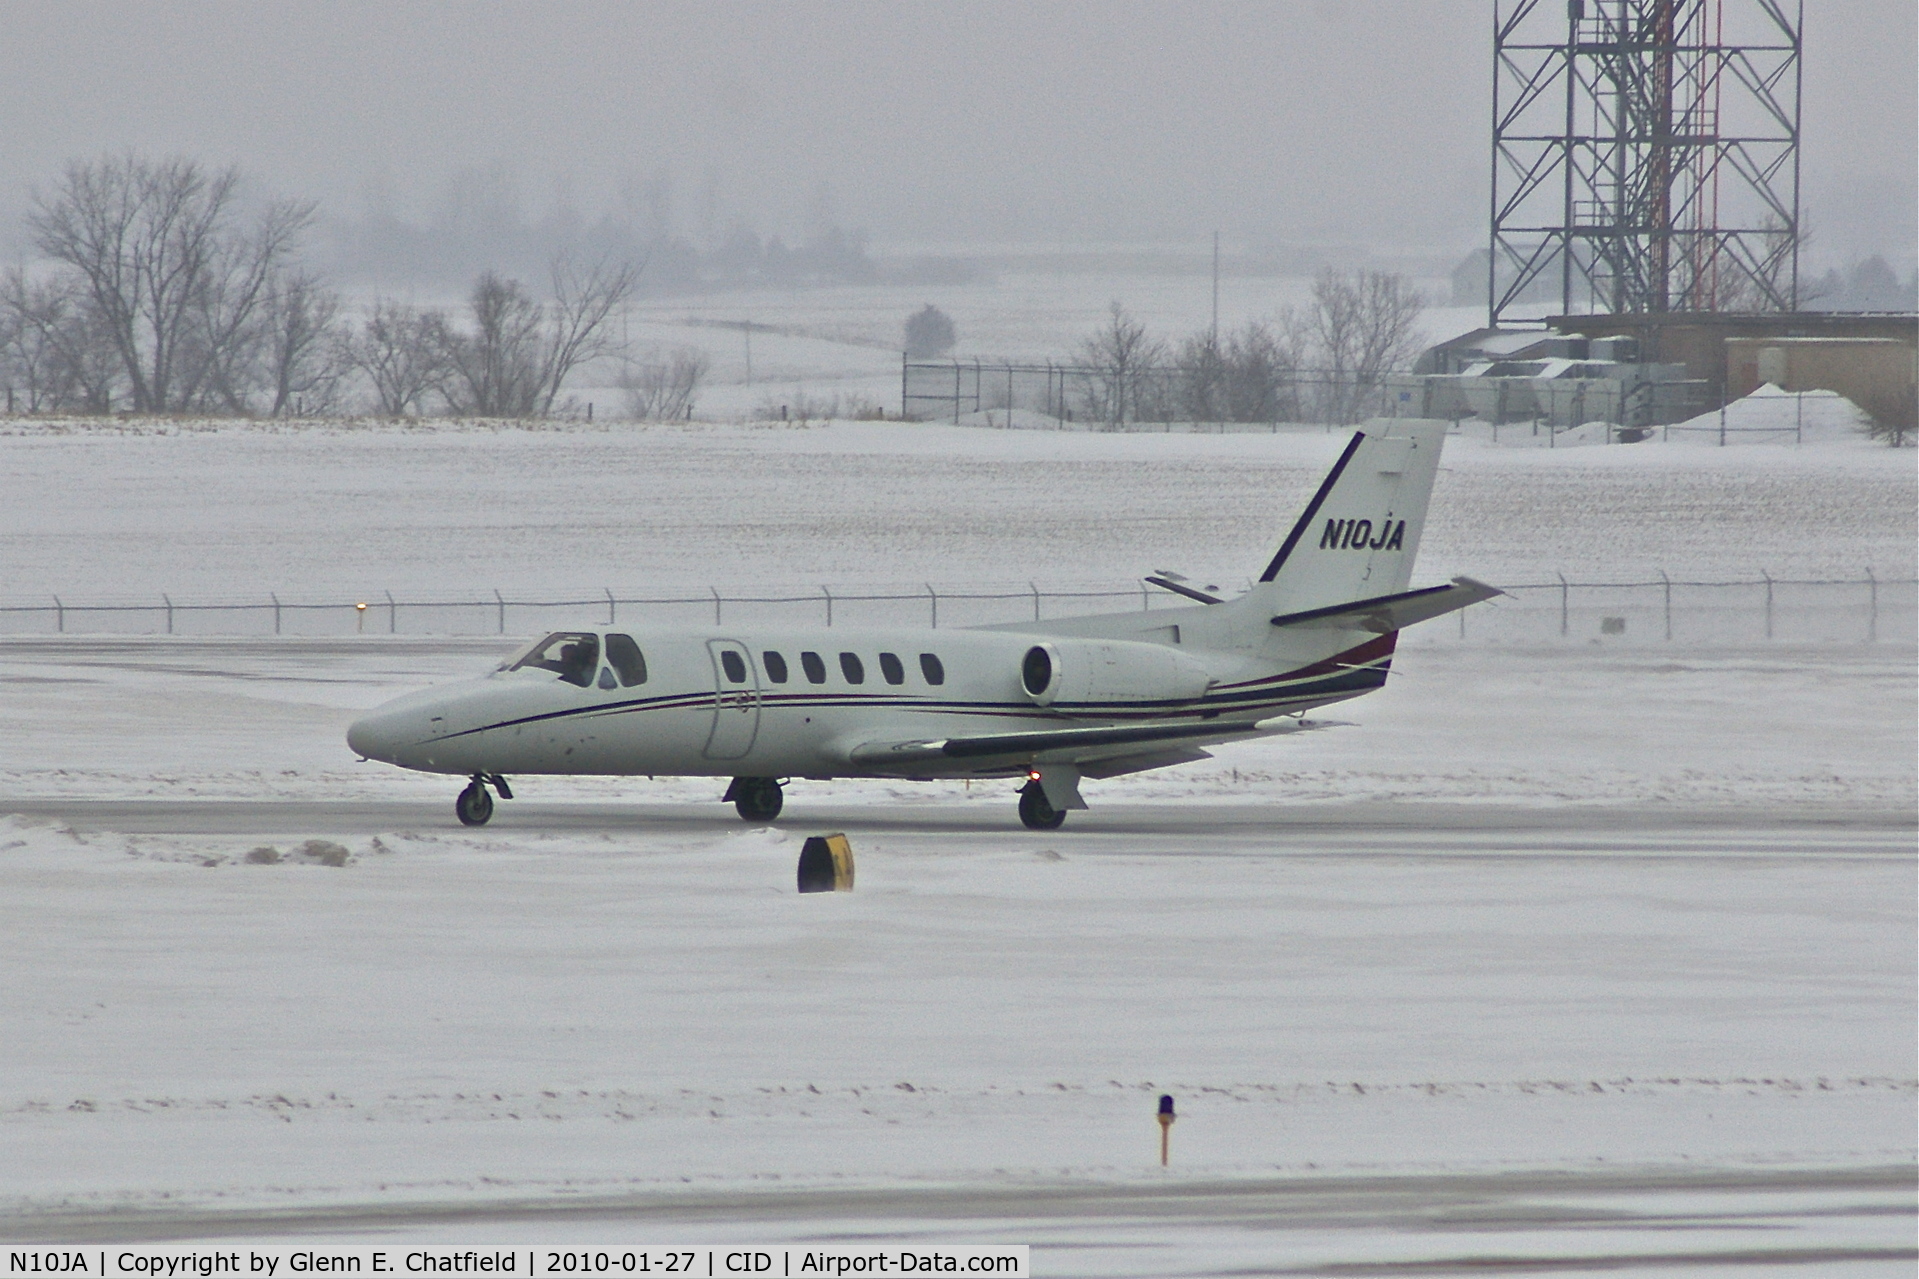 N10JA, 1978 Cessna 550 Citation II C/N 550-0219, Taxiing from PS Air to Runway 27, light snow falling